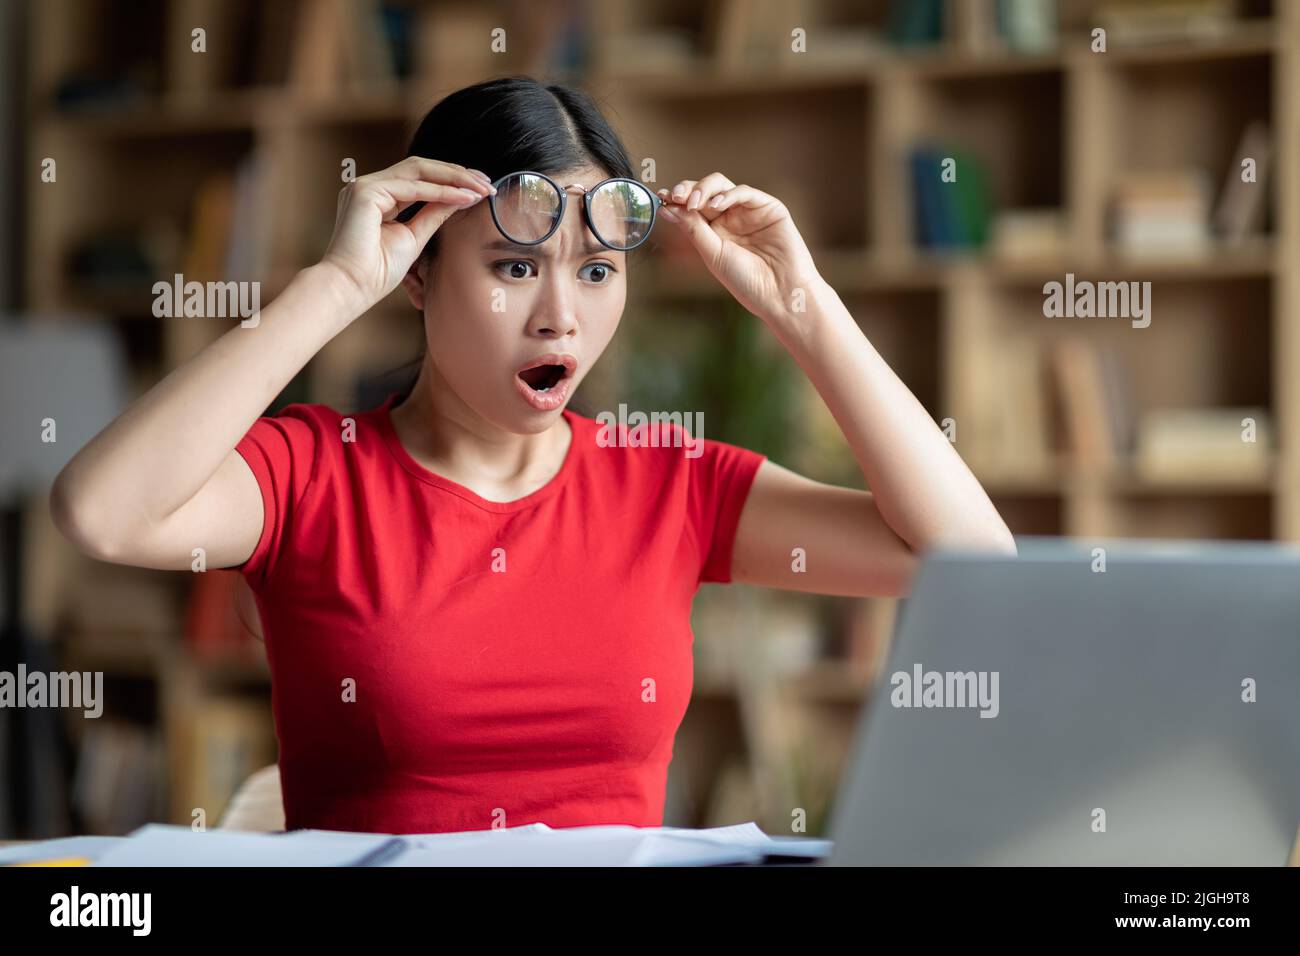 Sad shocked adolescent chinese girl with open mouth takes off glasses looks at computer in room interior Stock Photo